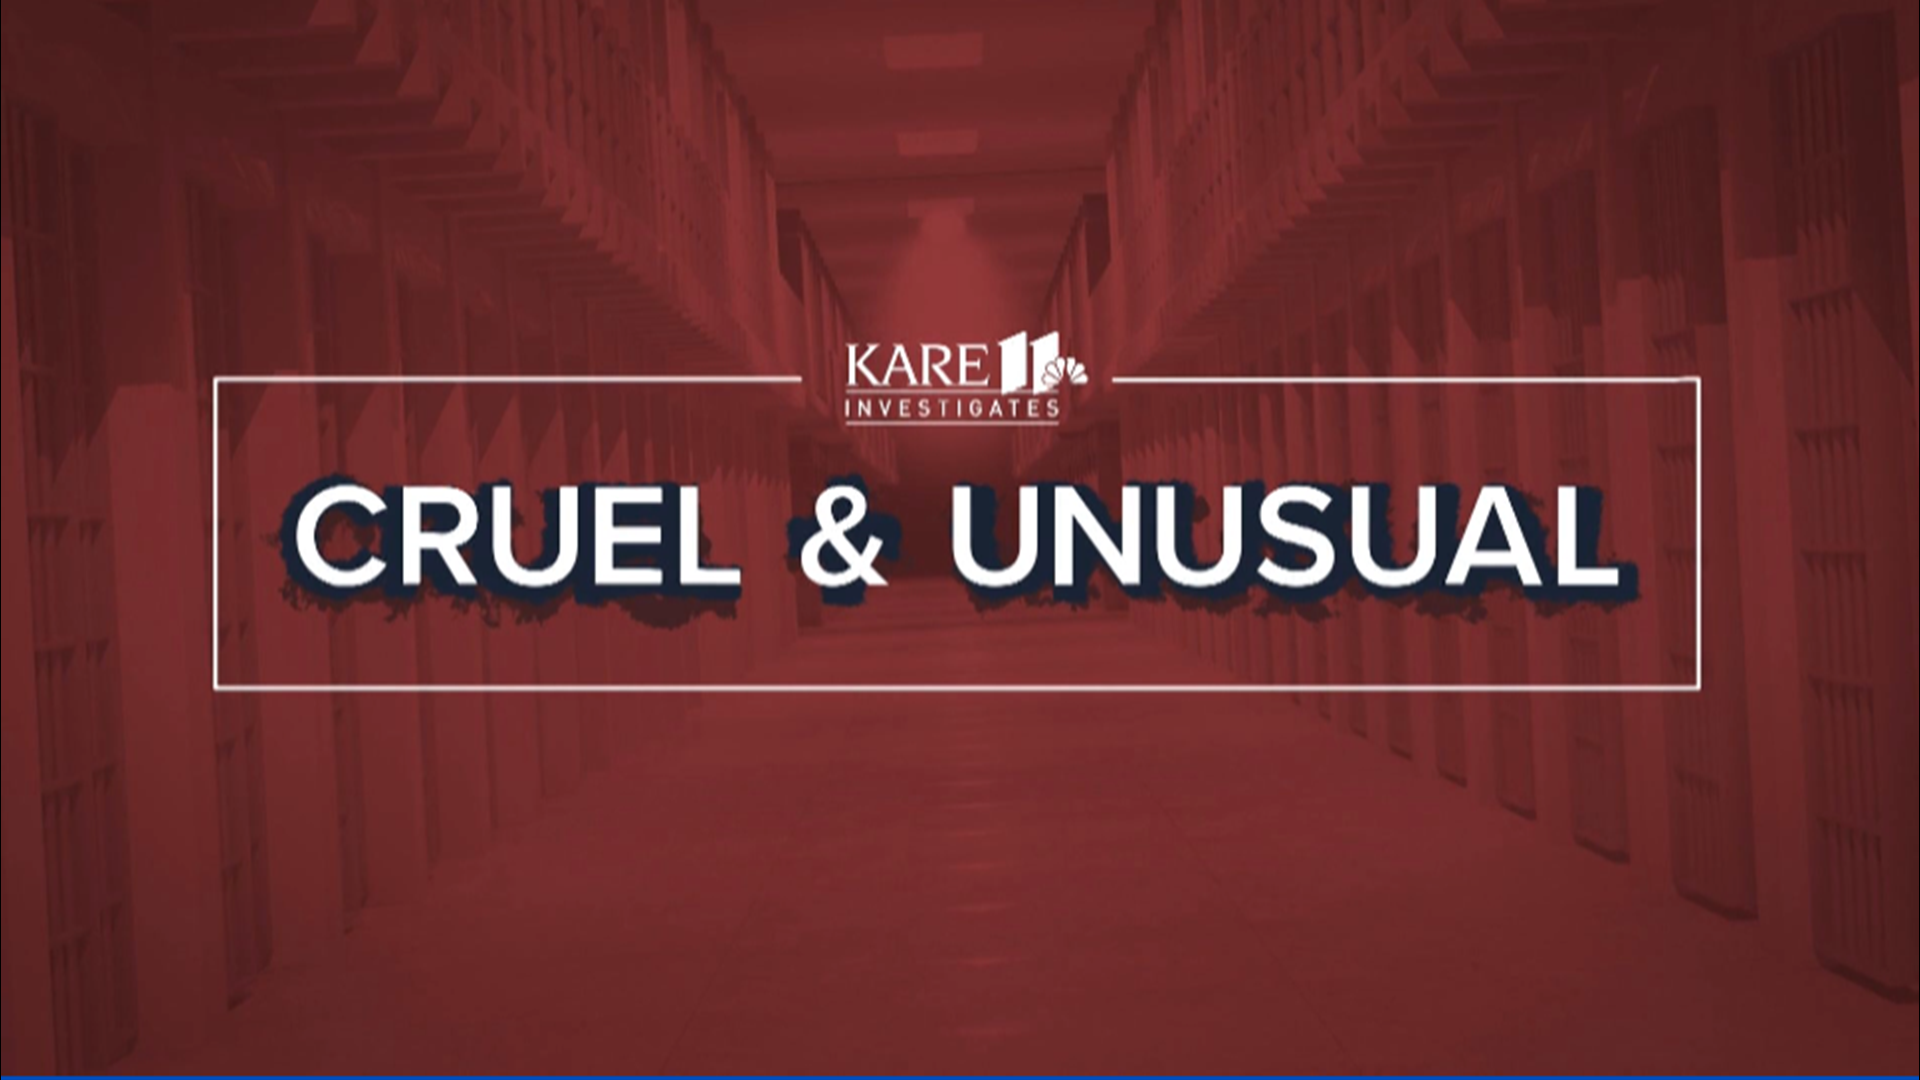 In this Peabody-nominated 2020 special, a KARE 11 investigation exposes suspicious pattern of inmate deaths.